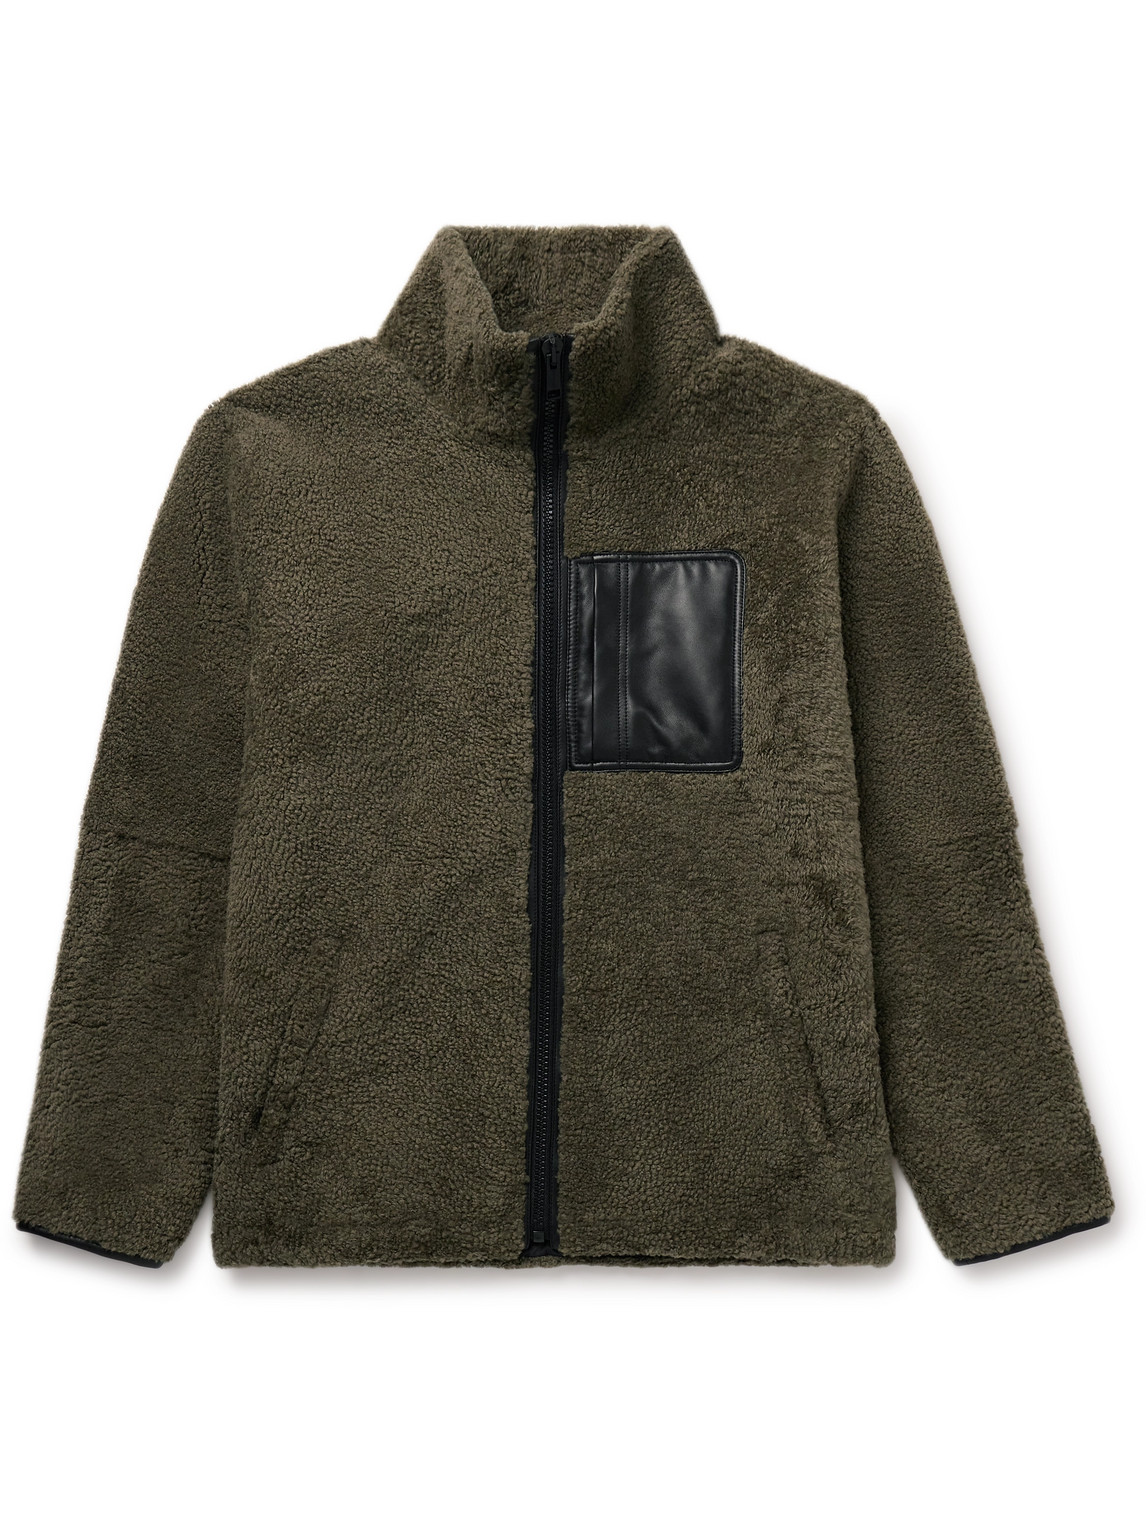 Yves Salomon - Reversible Leather-Trimmed Shearling and Shell Jacket - Men - Green - IT 52 von Yves Salomon